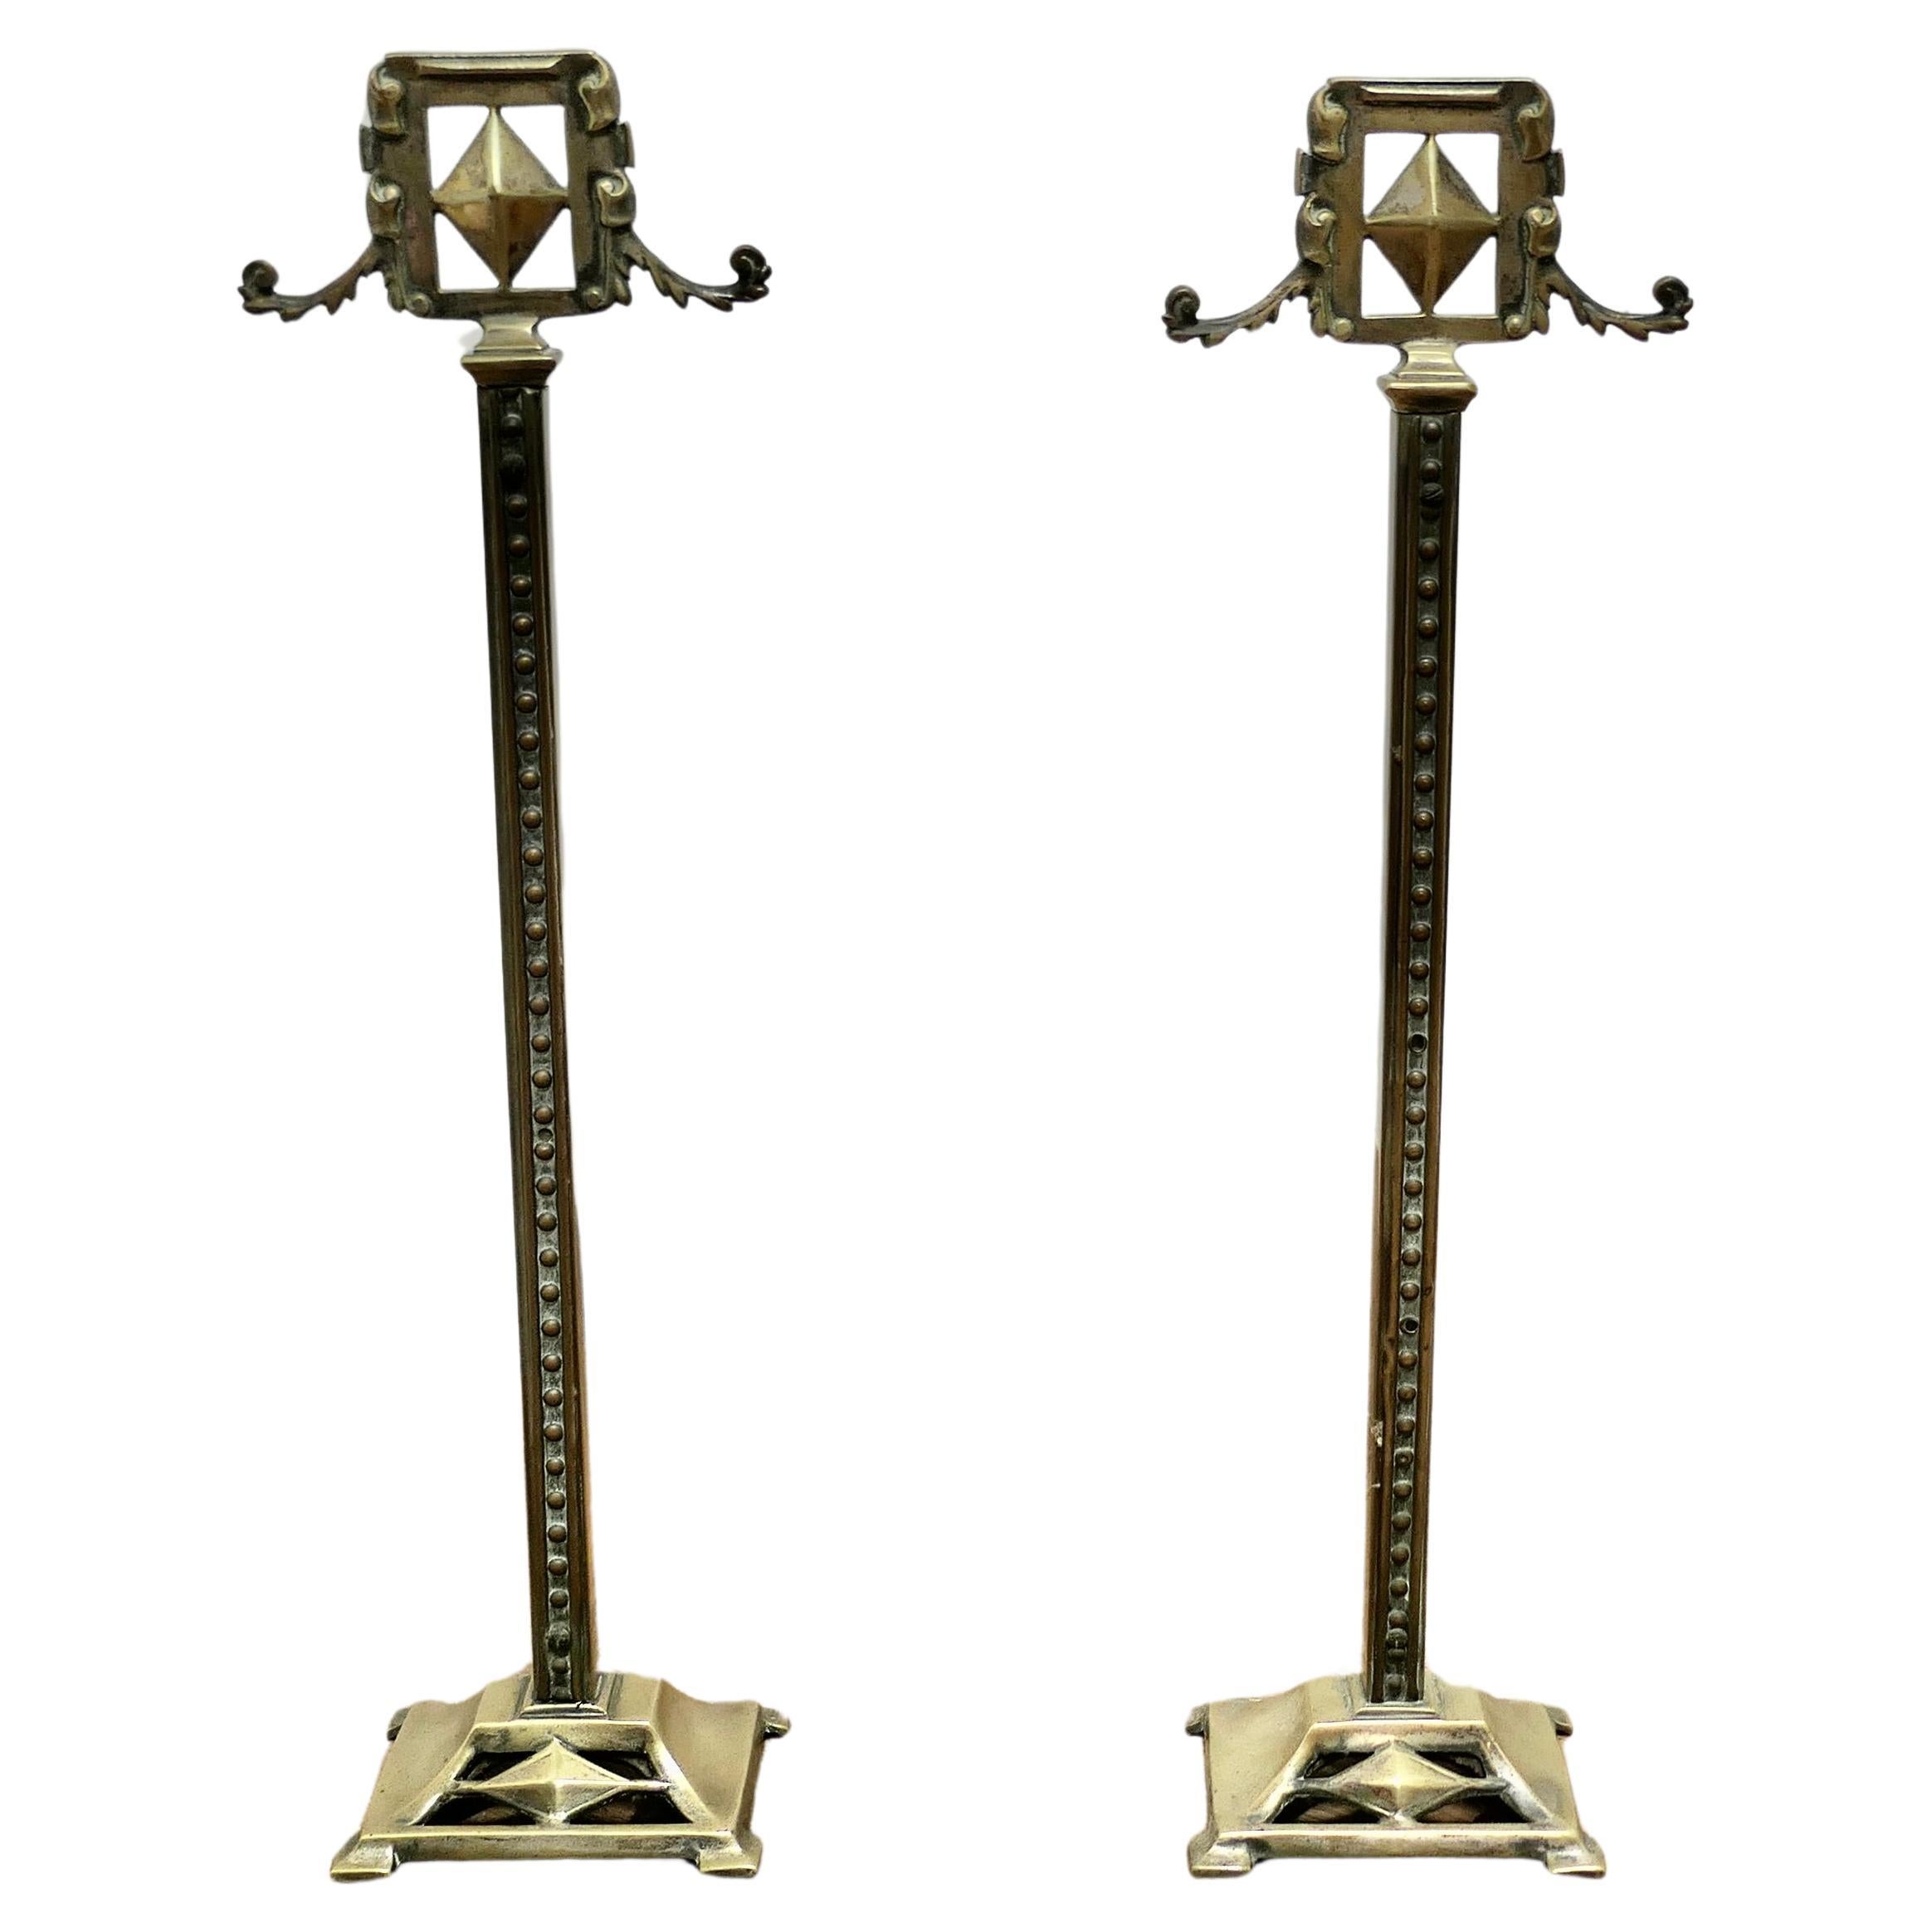 A Pair of Tall Victorian Brass Andirons or Tool Rests    